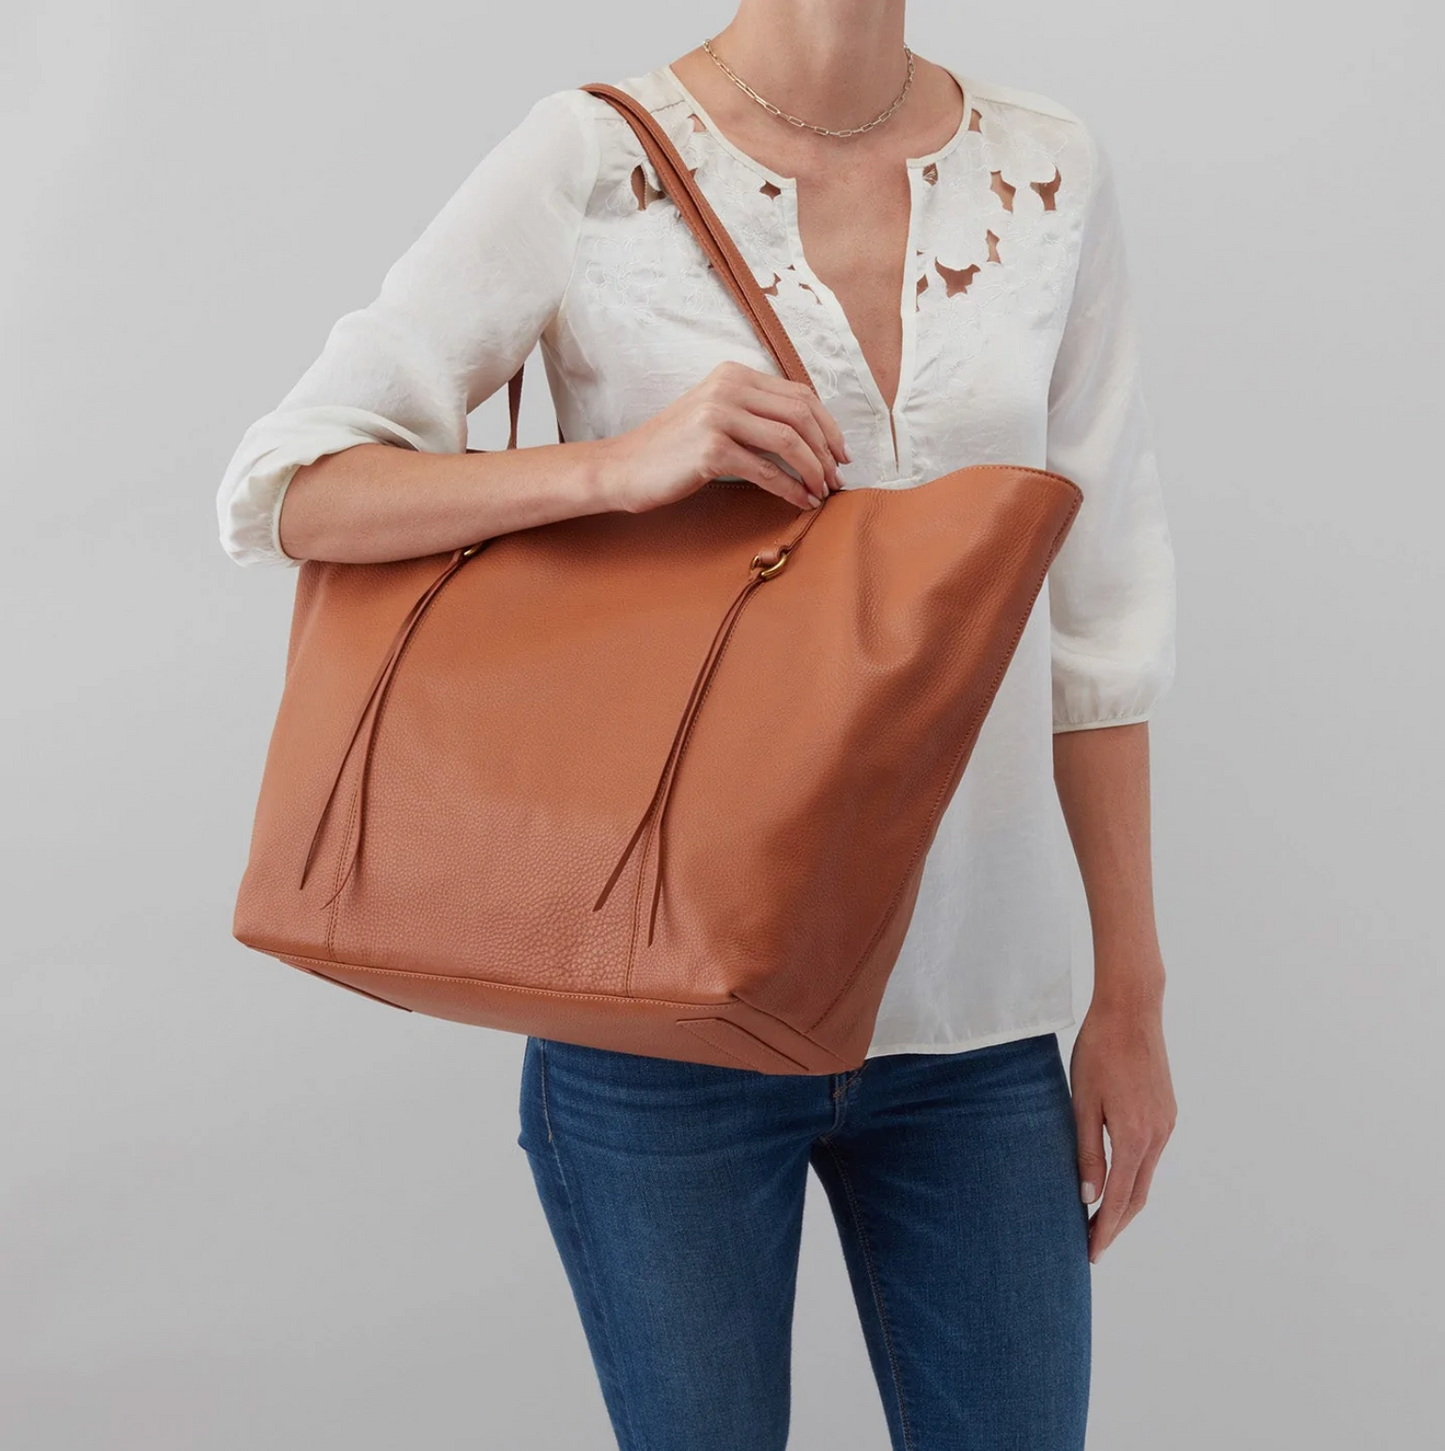 KINGSTON LARGE TOTE in Cashew Pebbled Leather